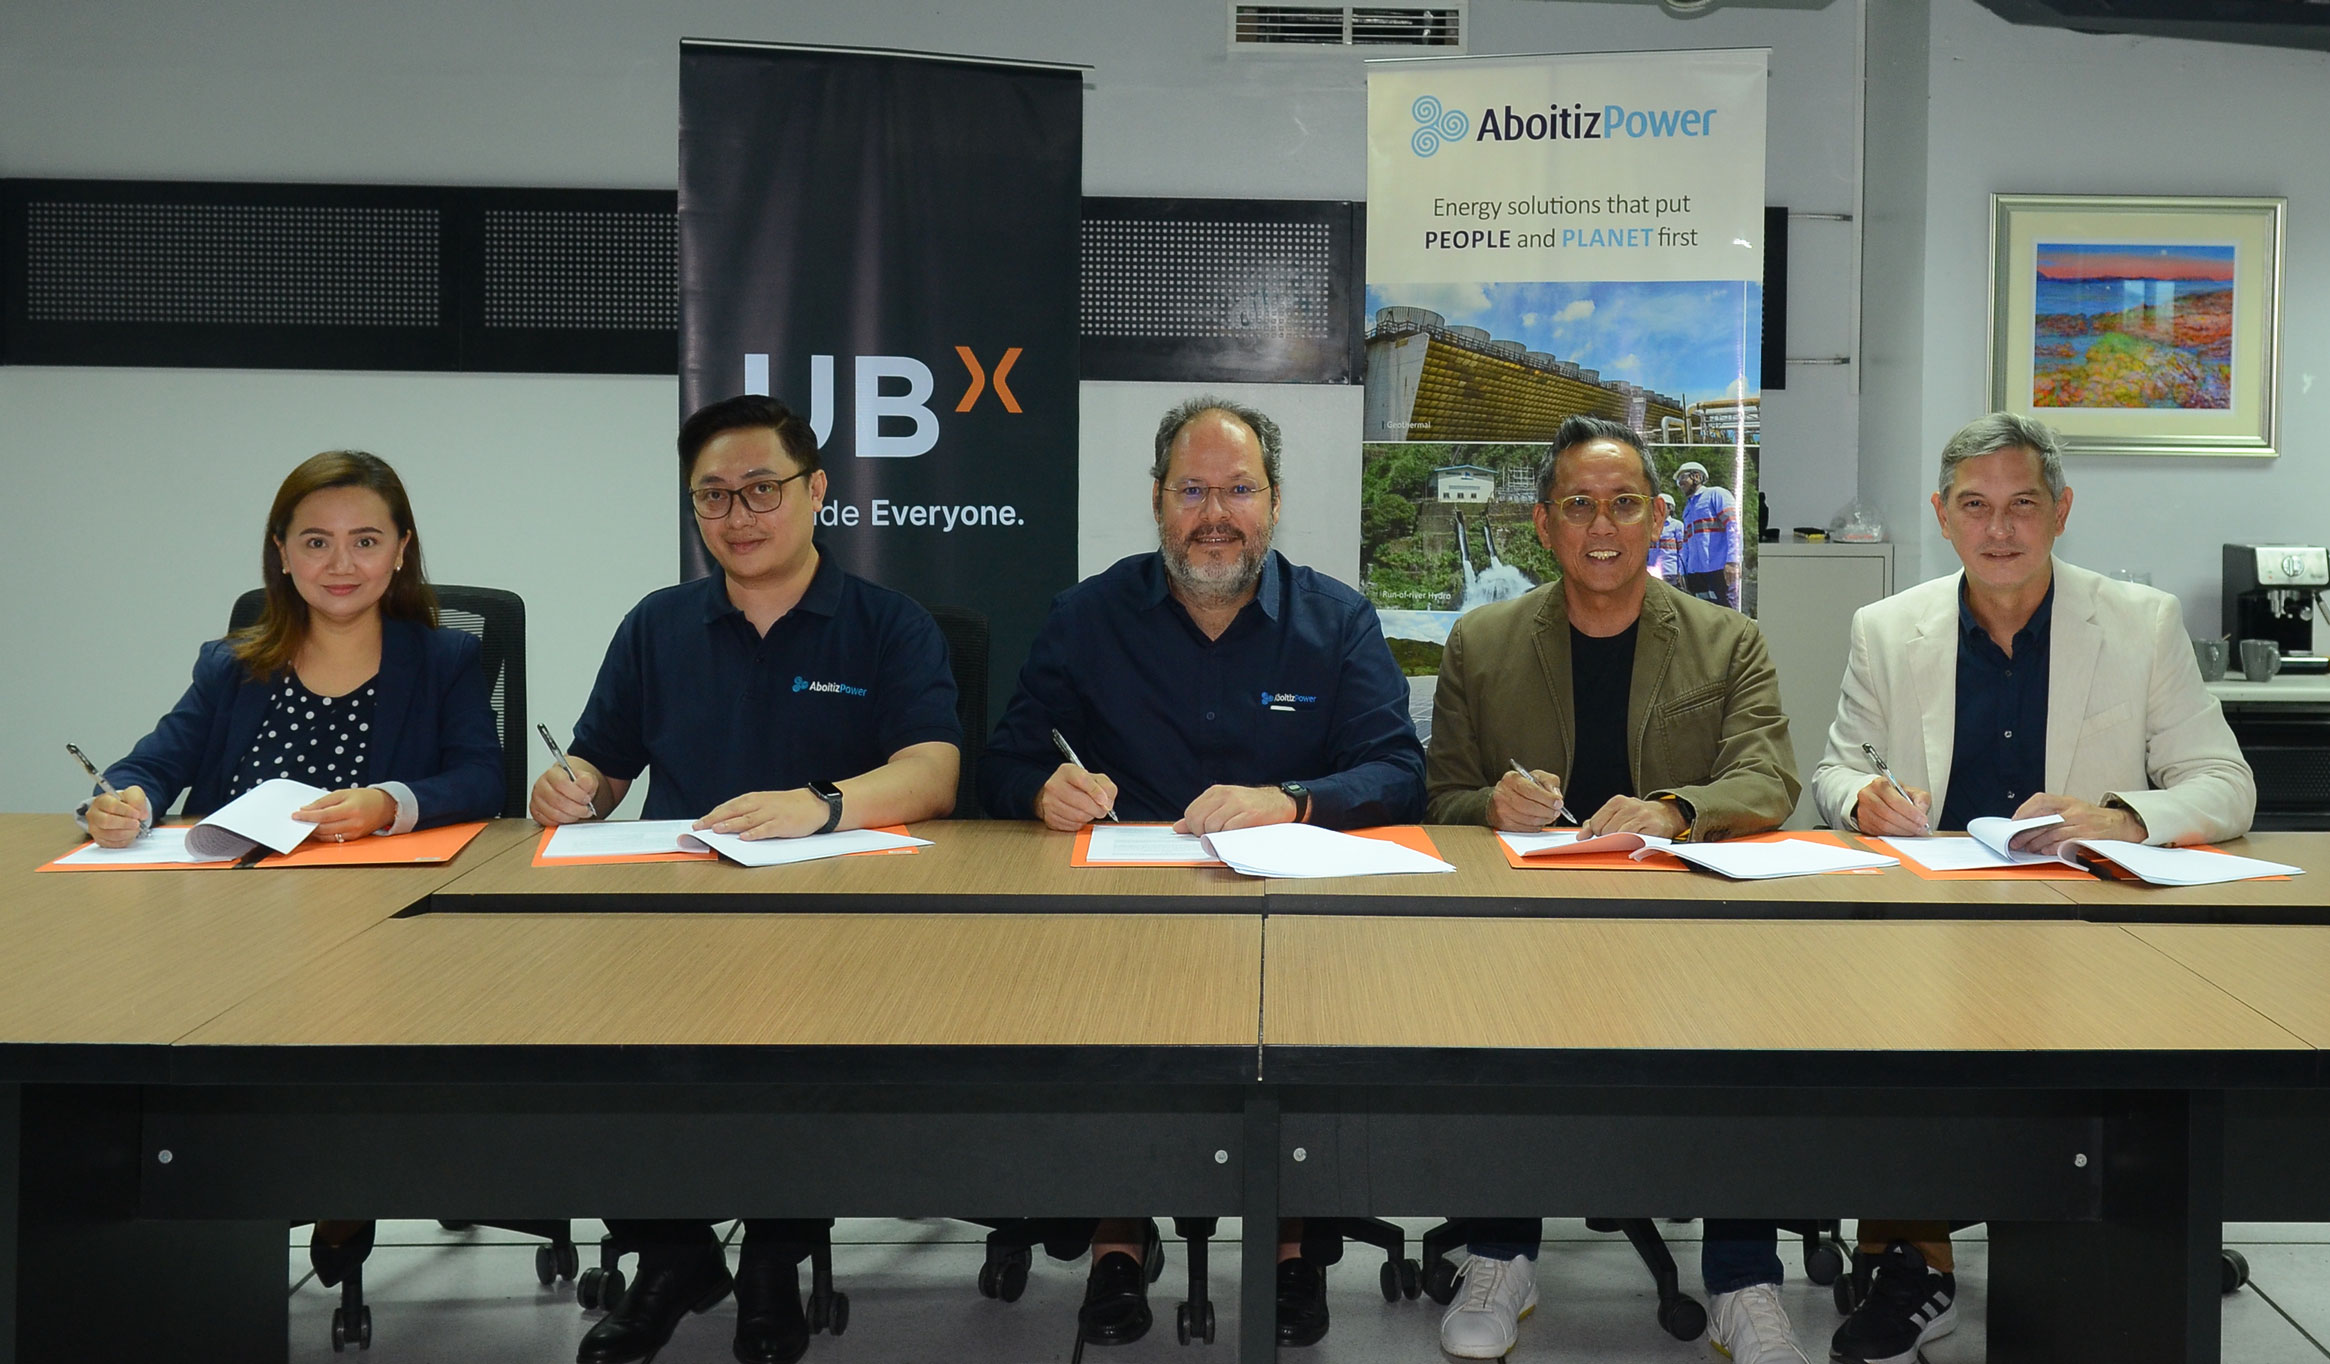 UBX powers up AboitizPower’s mobile app with digital payments collection 